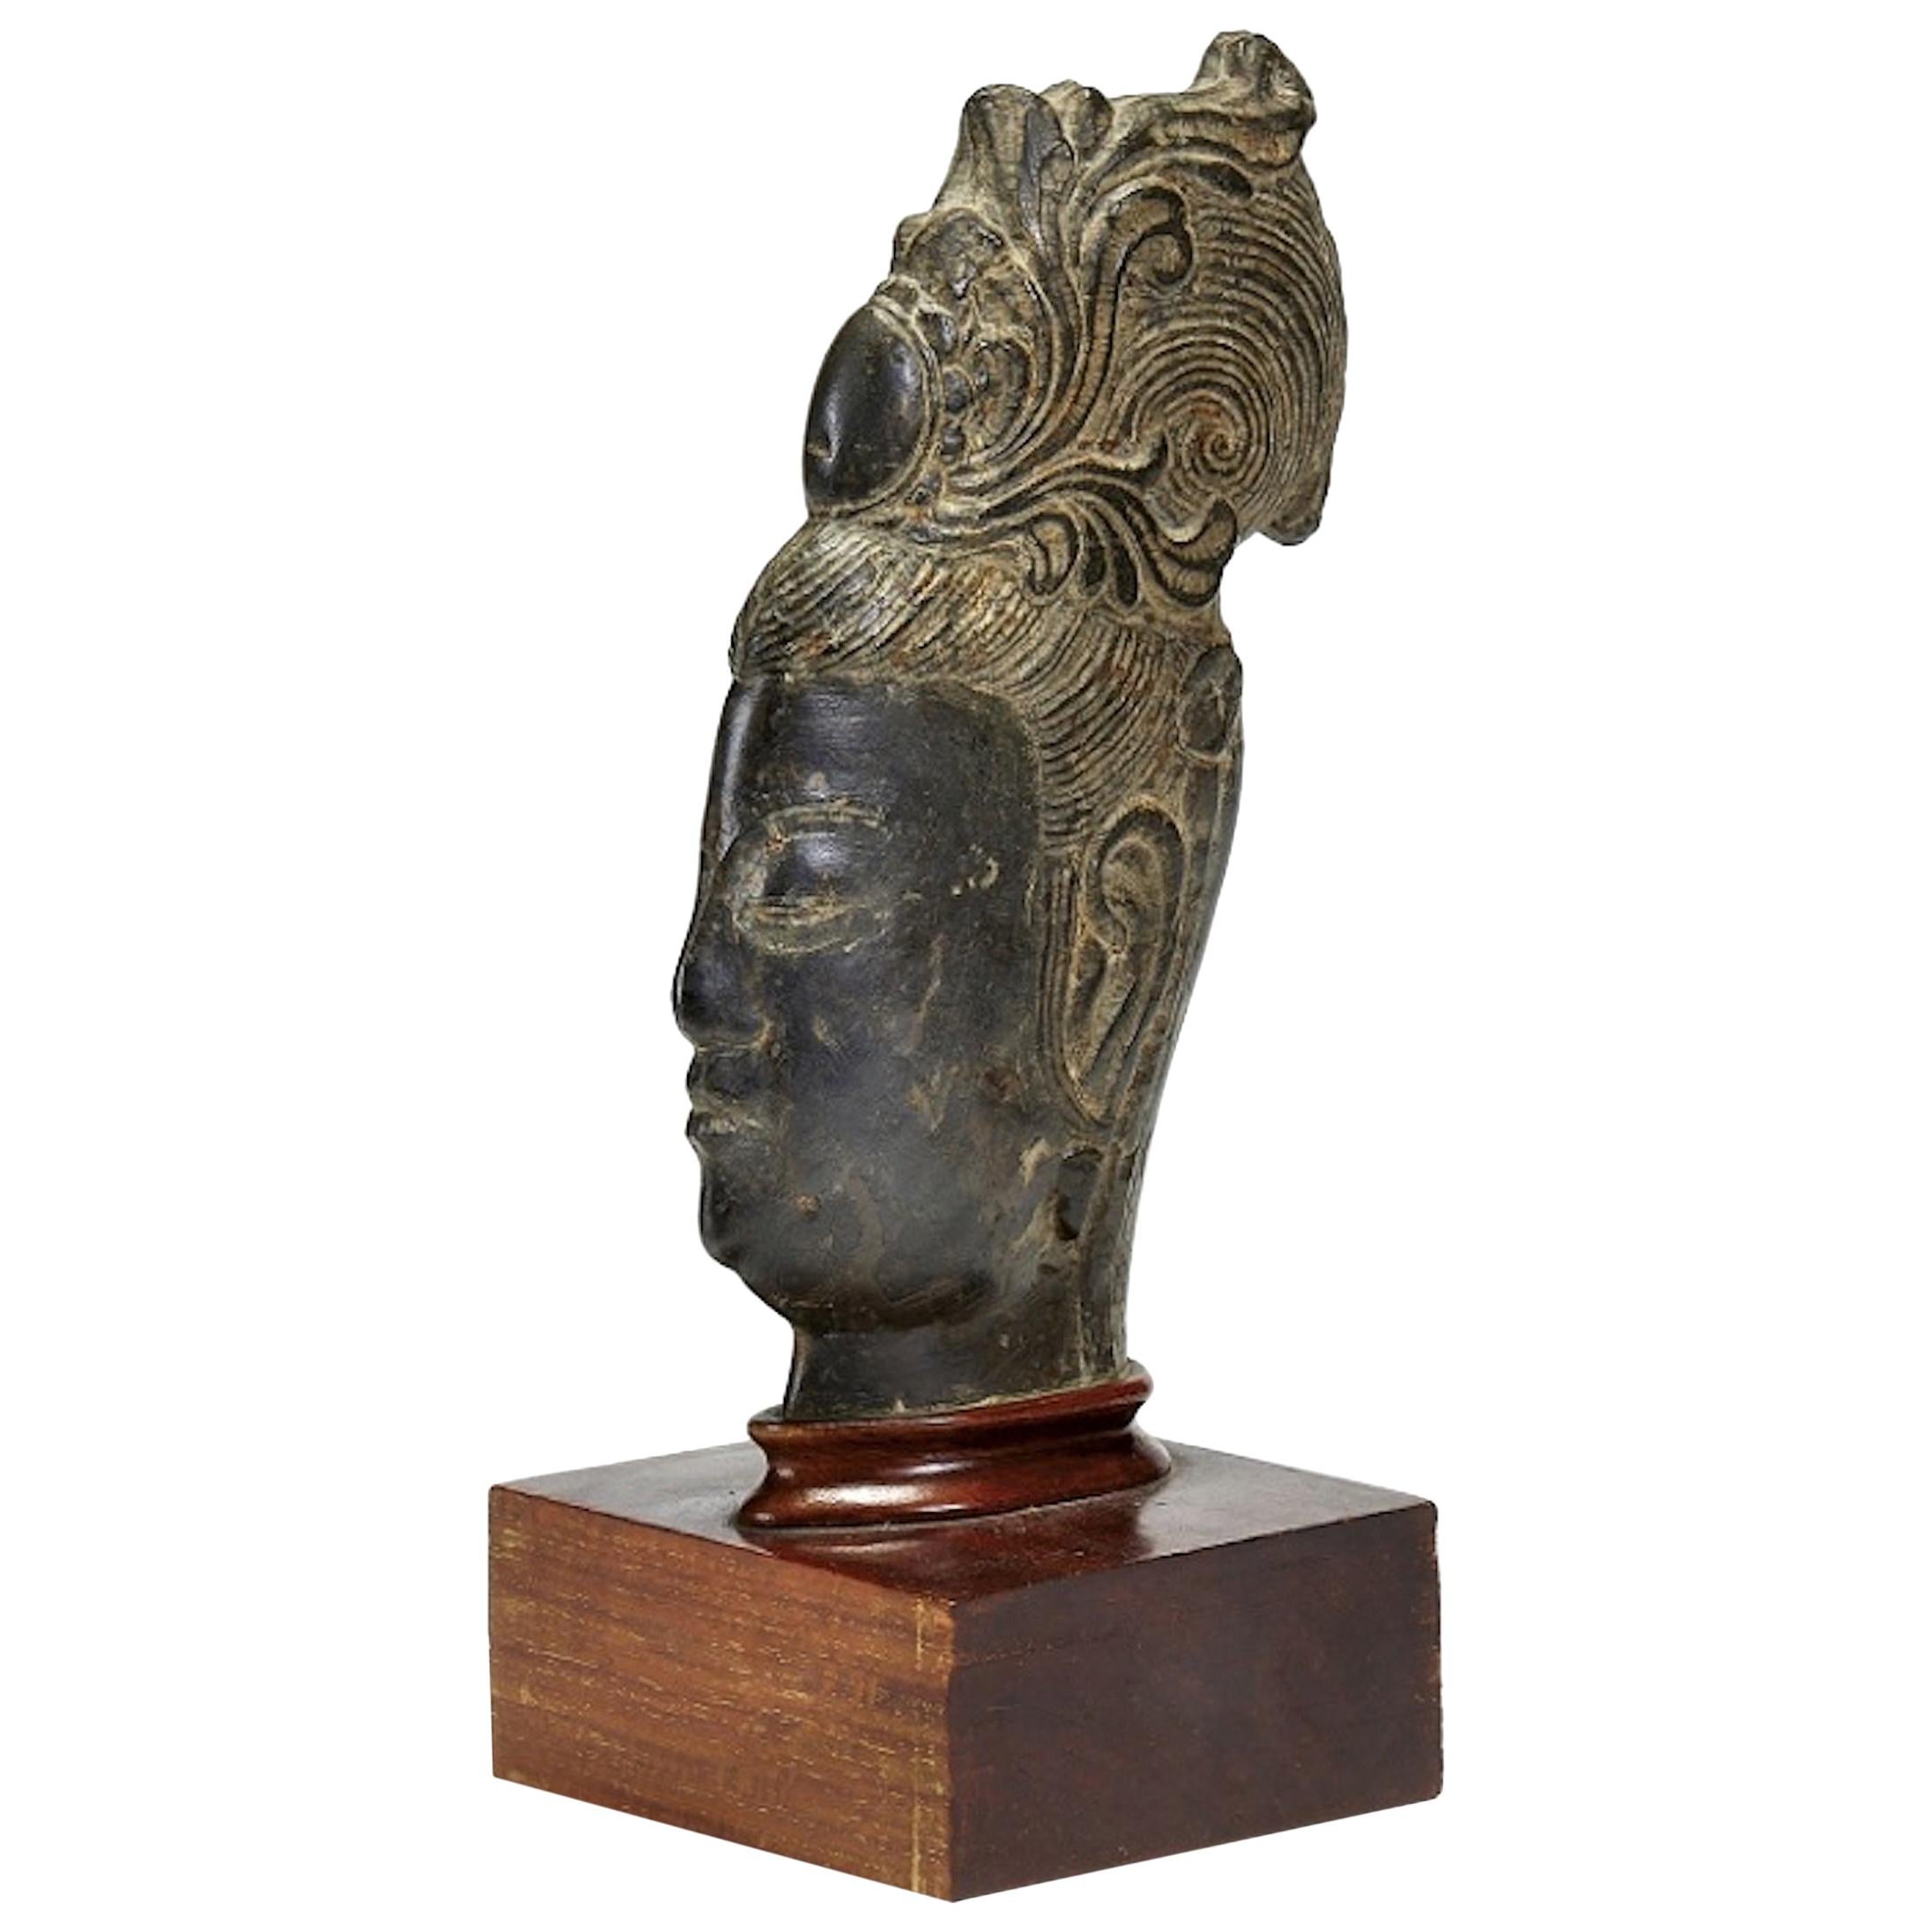 Guanyin's Head, Original Stone Sculpture by Chinese Master, Early 20th Century